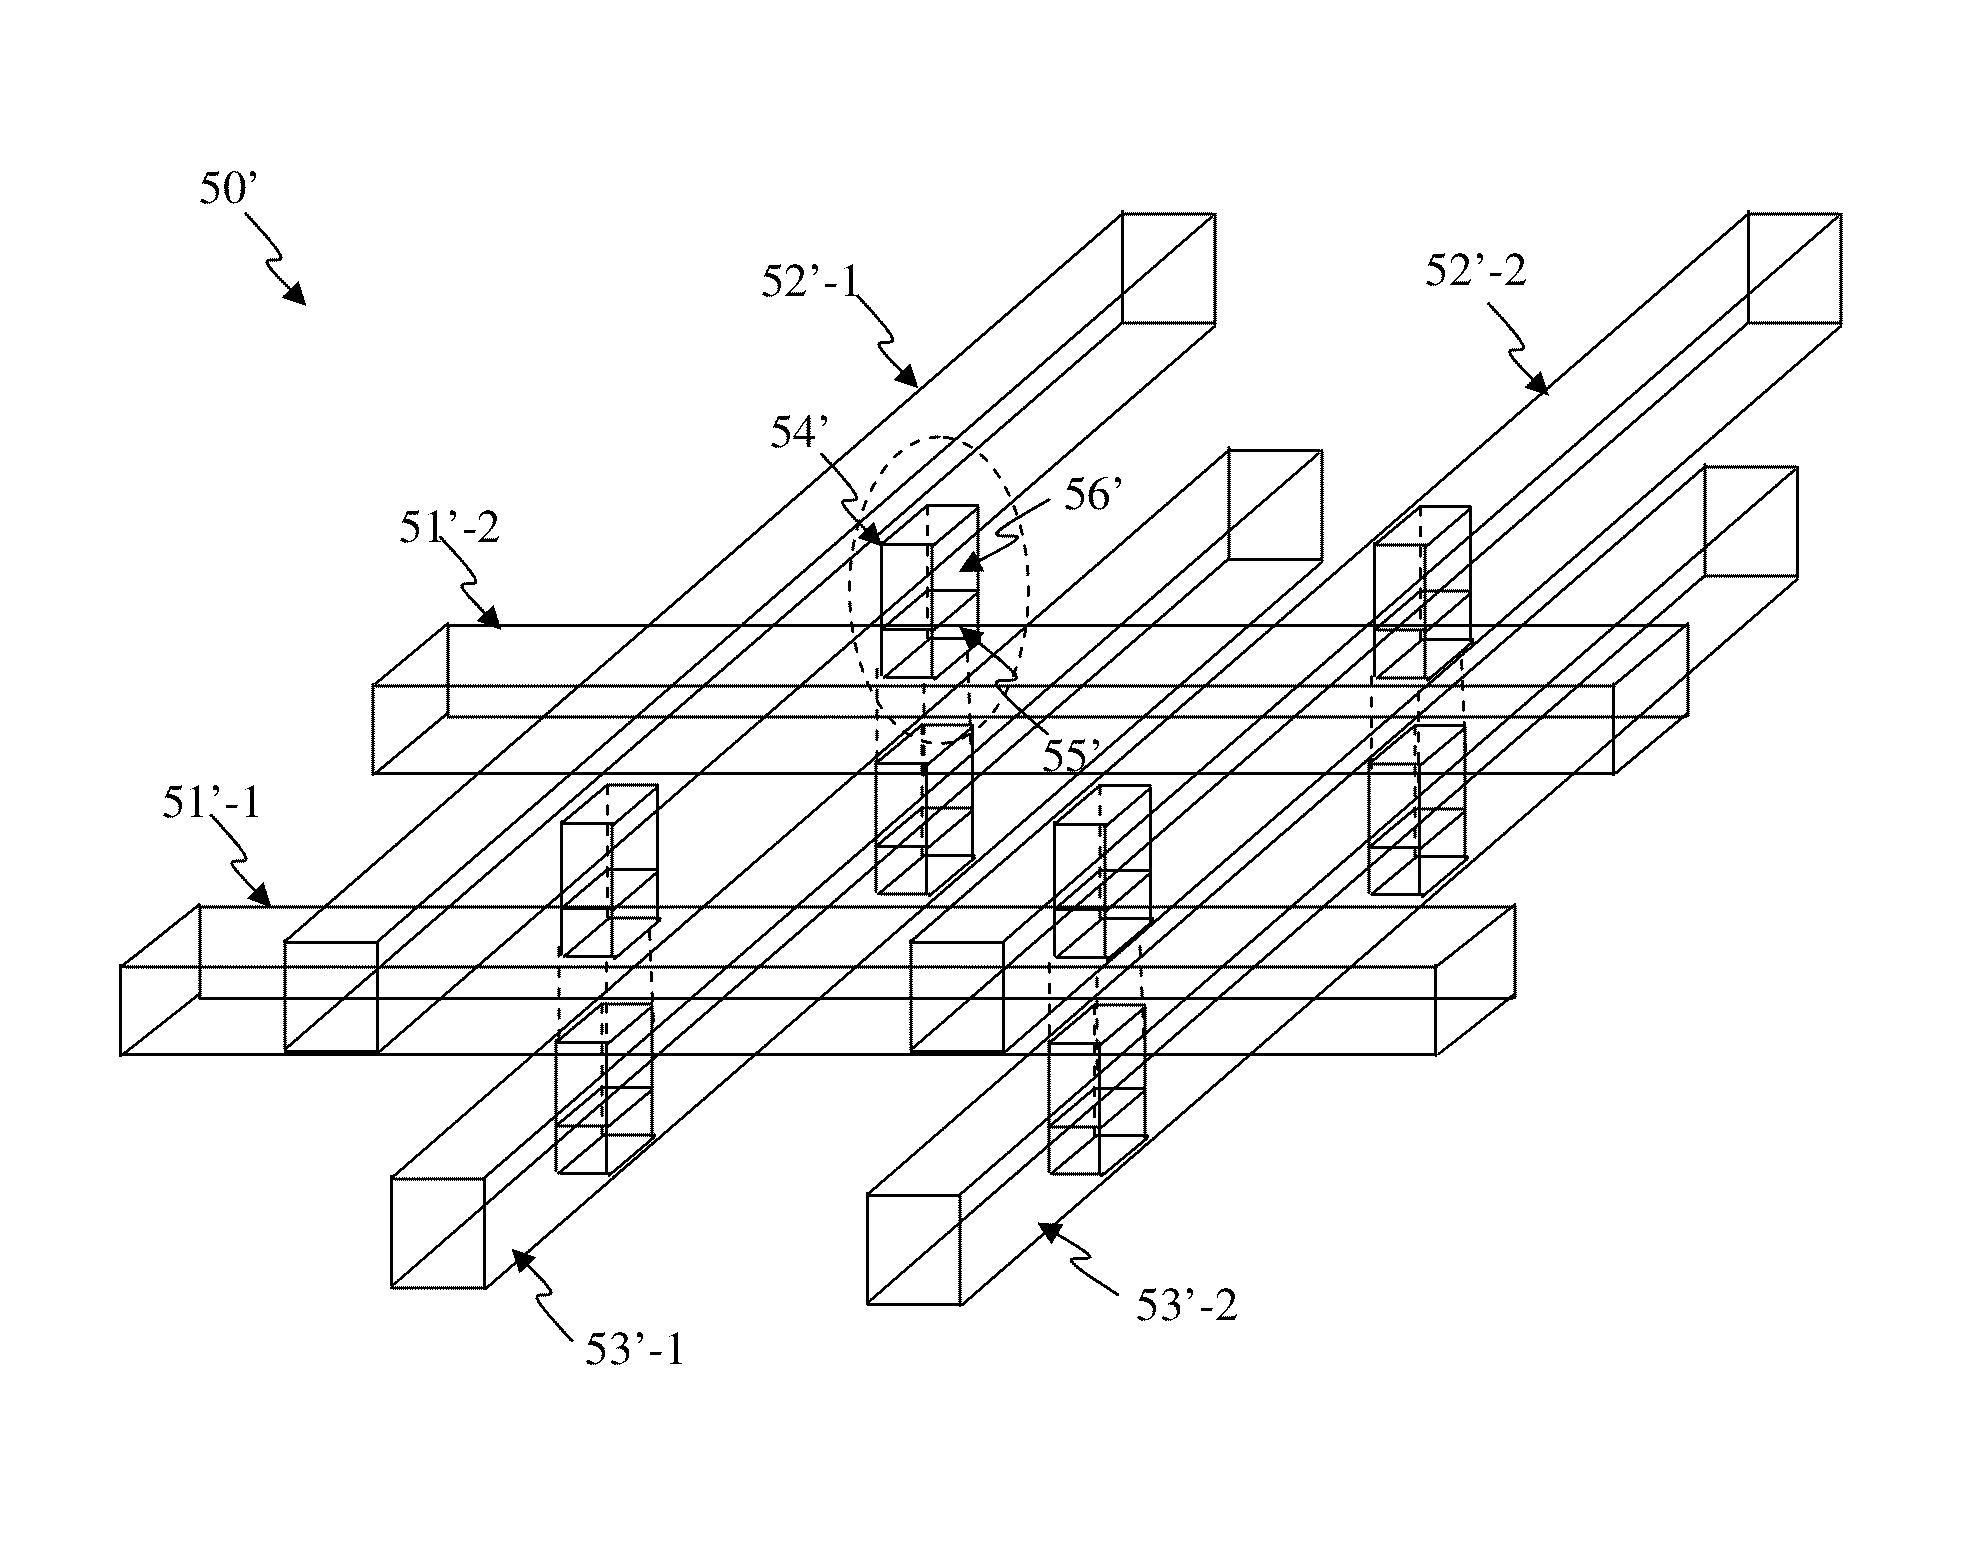 Programmable Resistive Device and Memory Using Diode as Selector